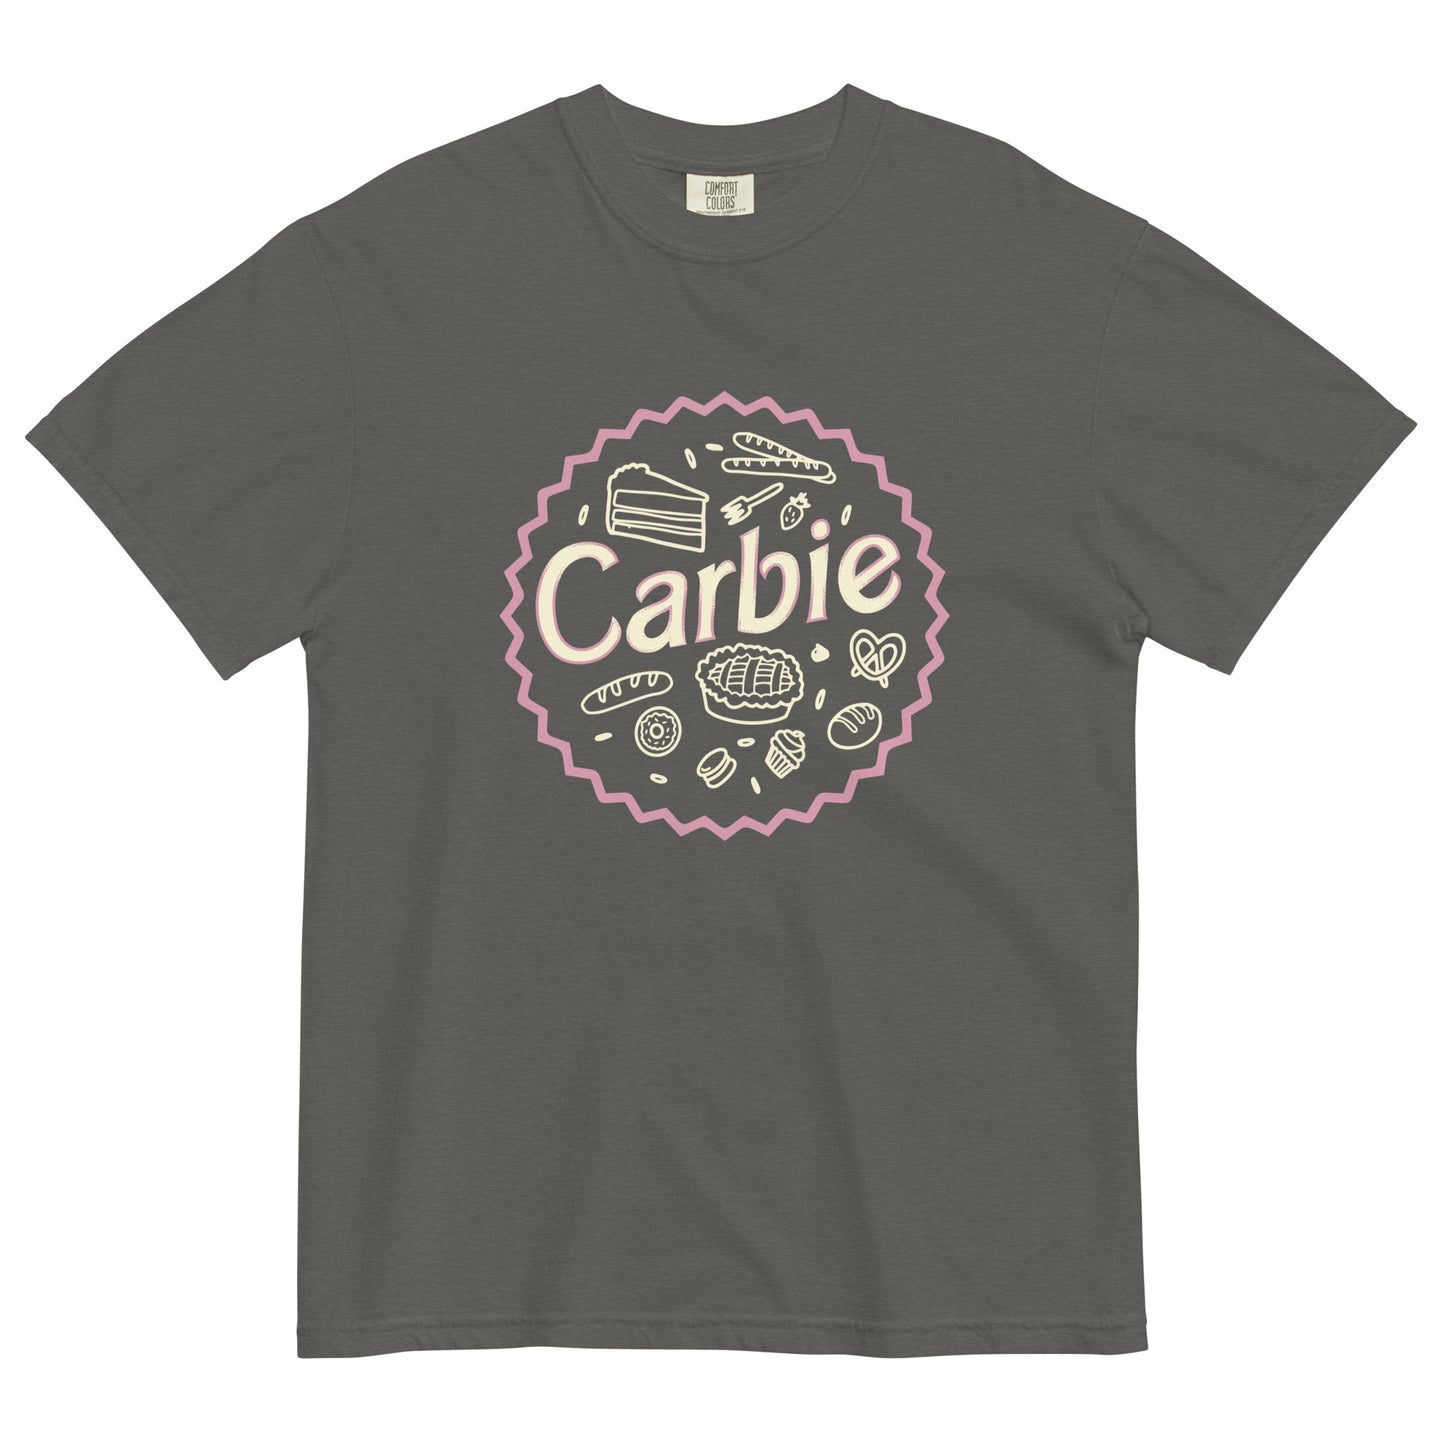 Carbie Men's Relaxed Fit Tee